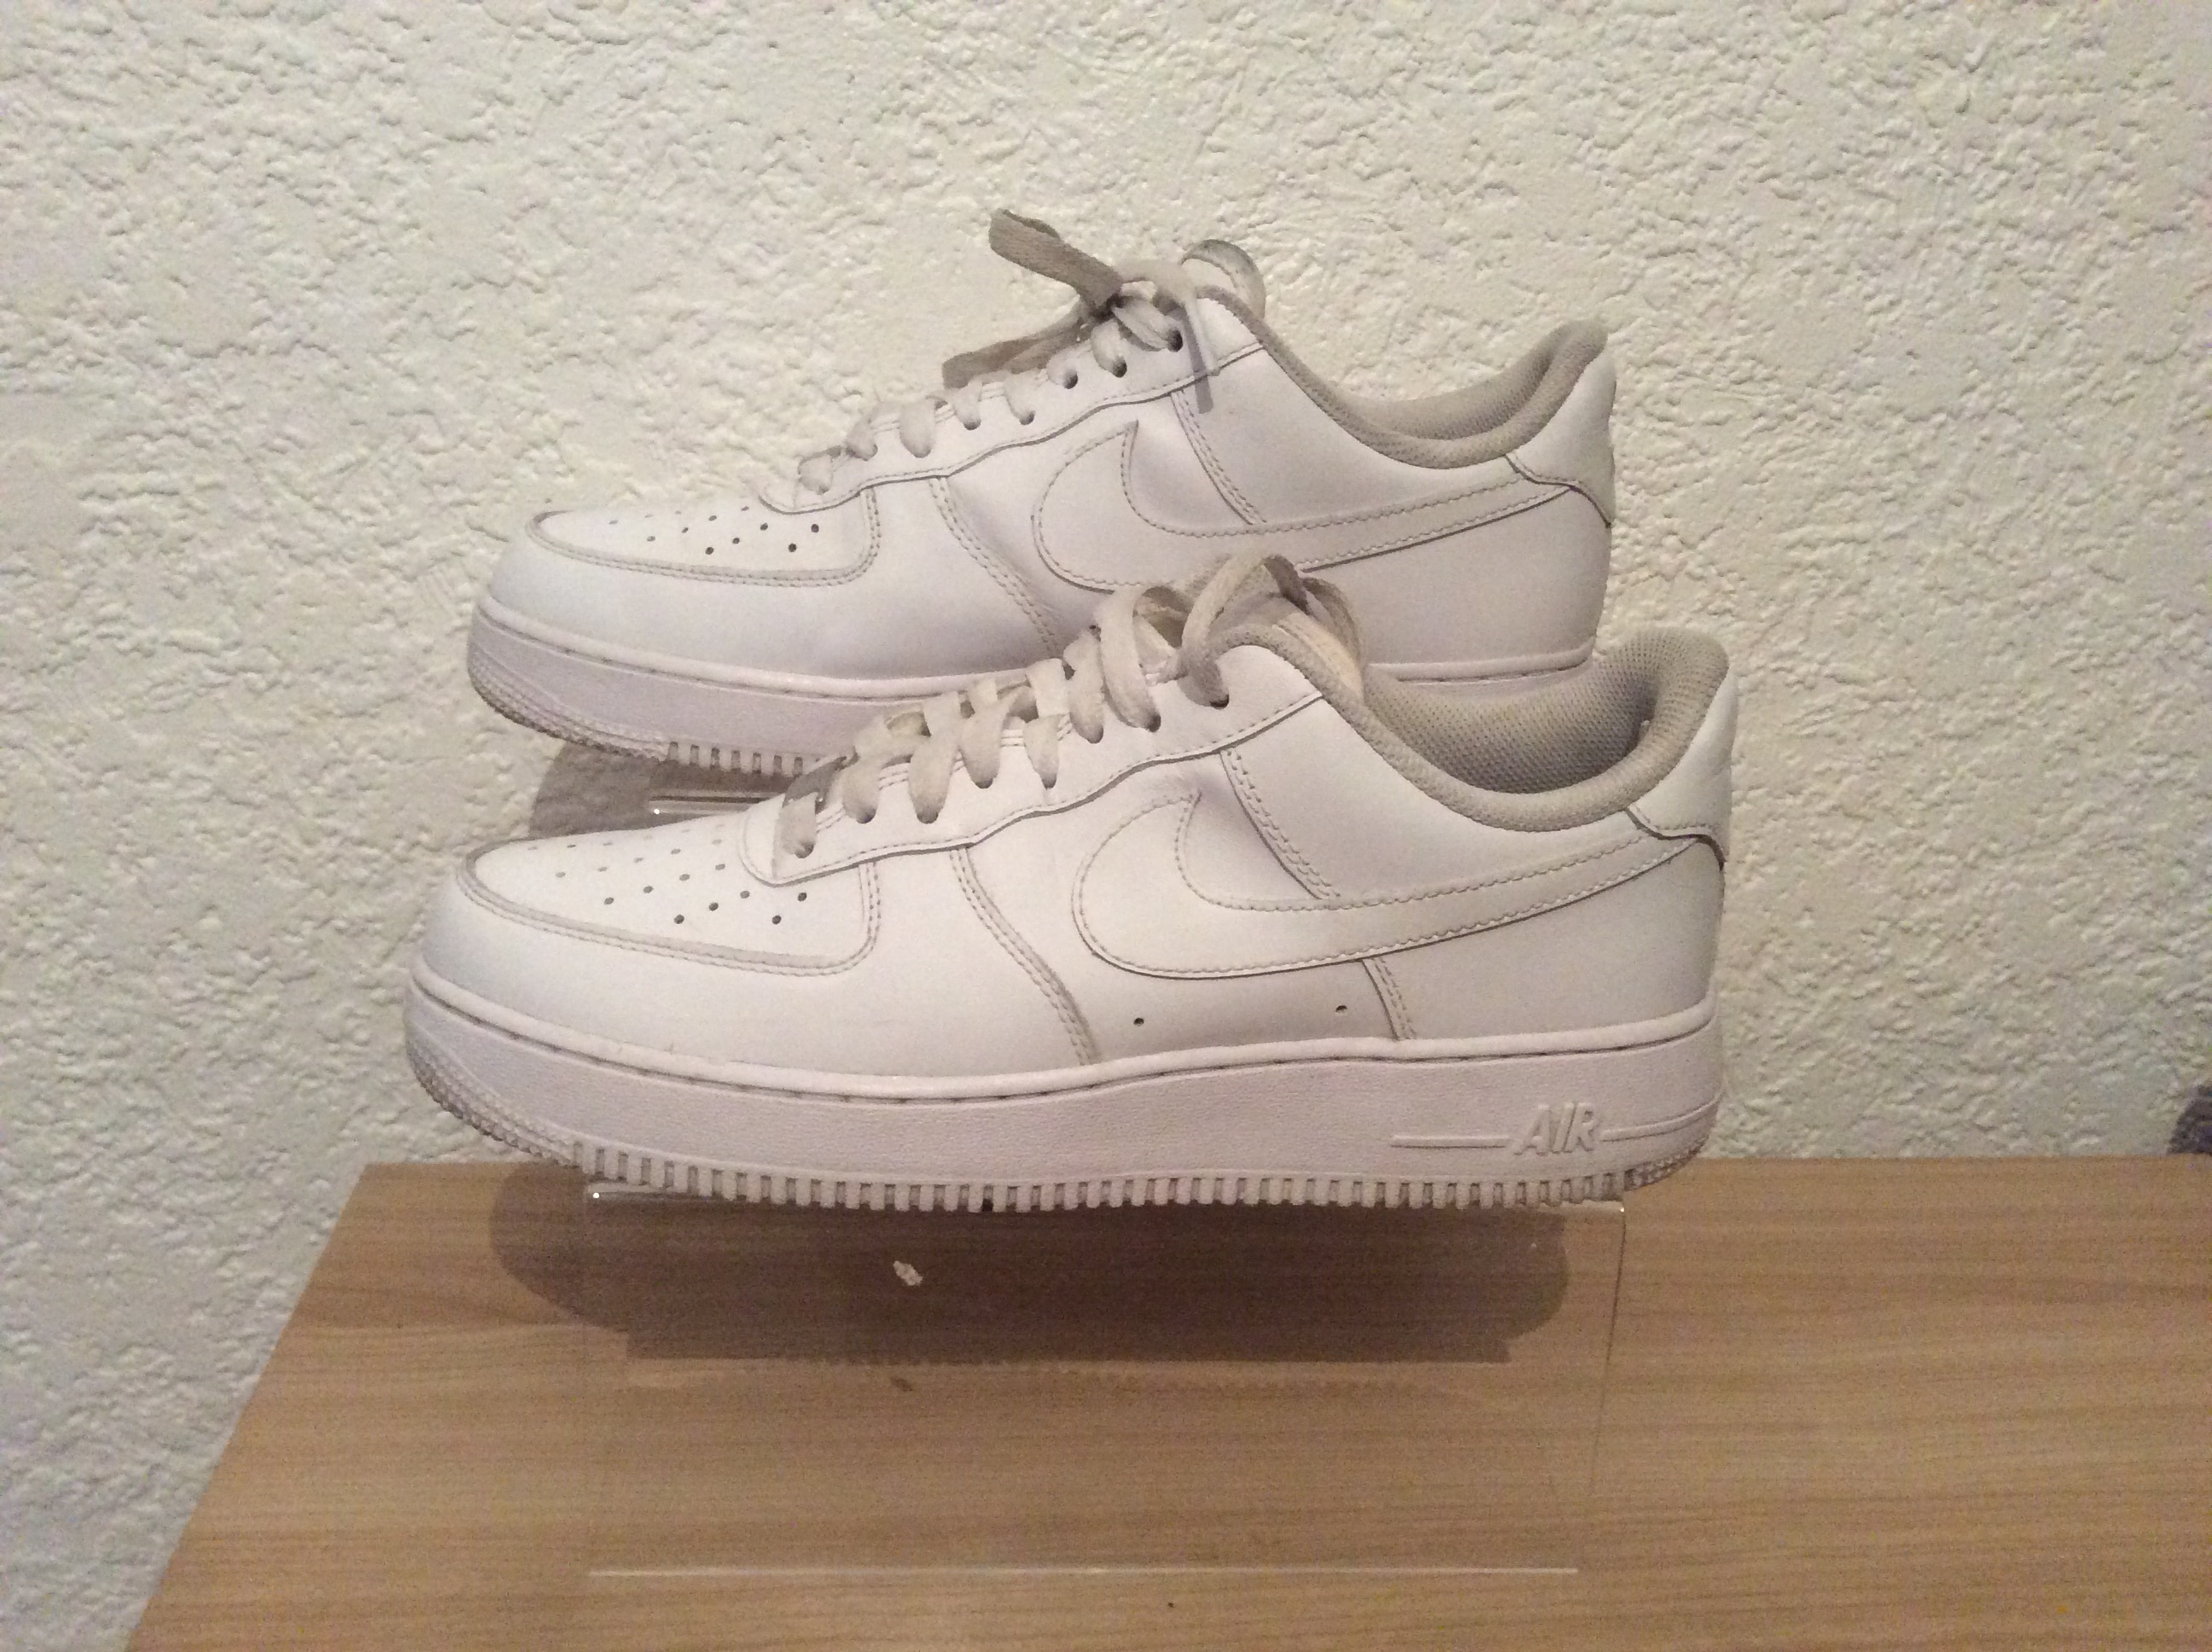 Second hand white air force 1 trainers